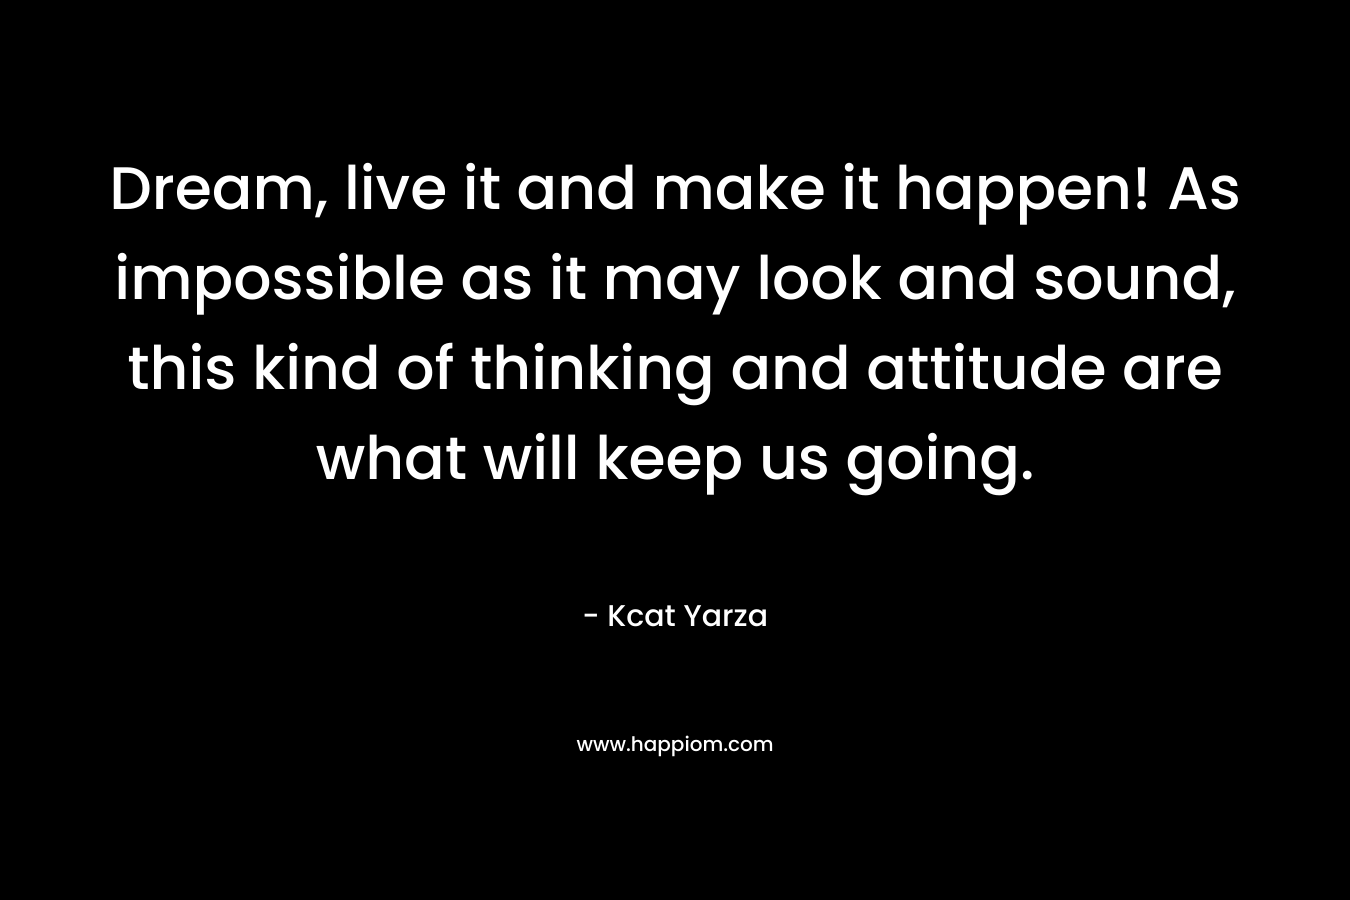 Dream, live it and make it happen! As impossible as it may look and sound, this kind of thinking and attitude are what will keep us going. – Kcat Yarza